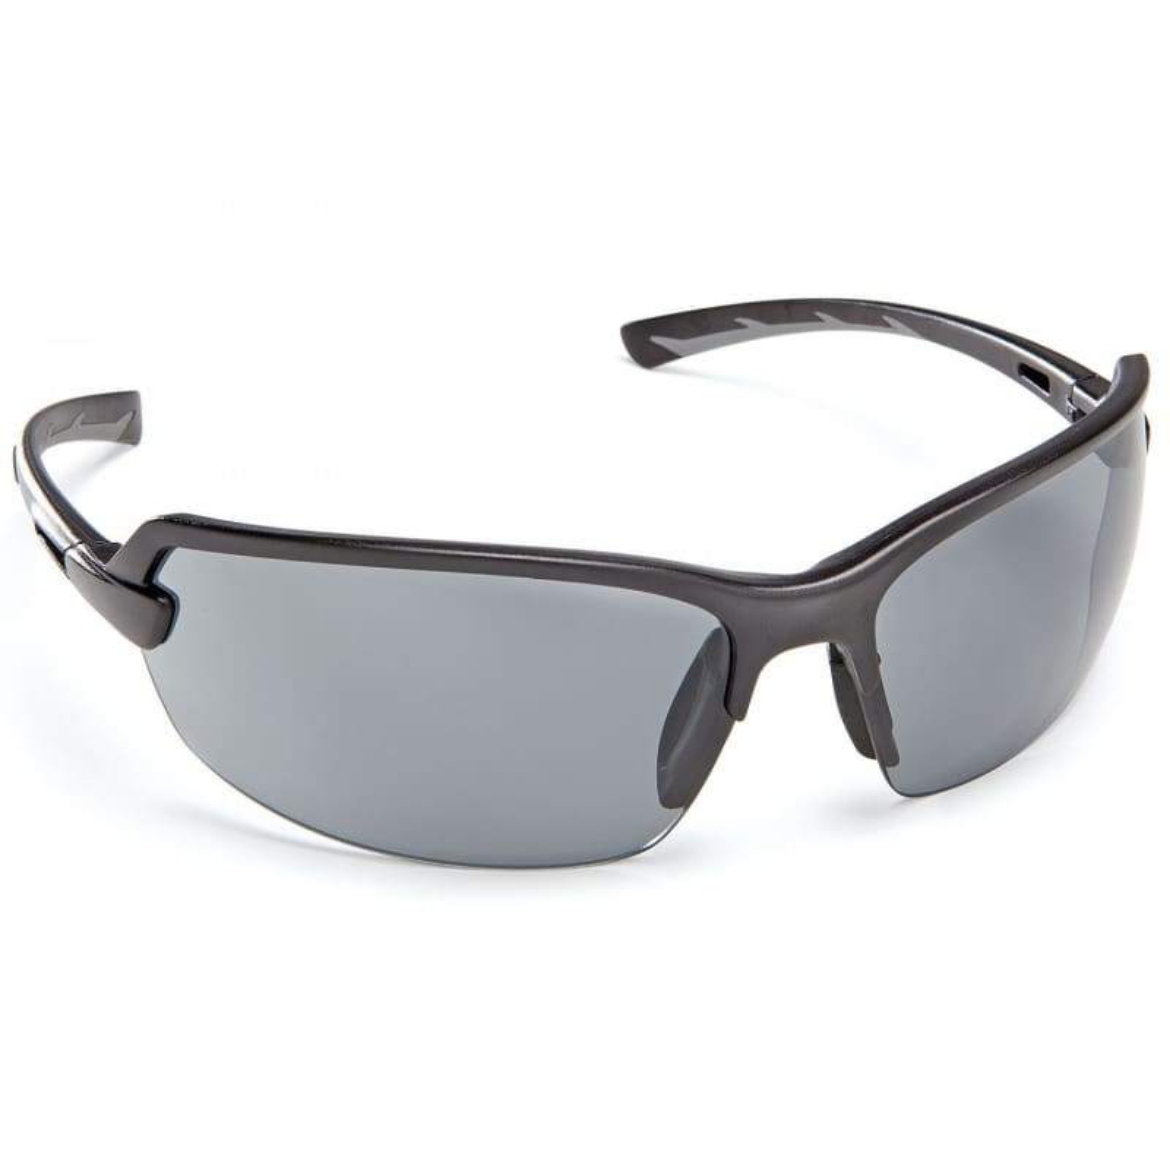 Picture of Force360 Horizon Smoke Lens Safety Glasses